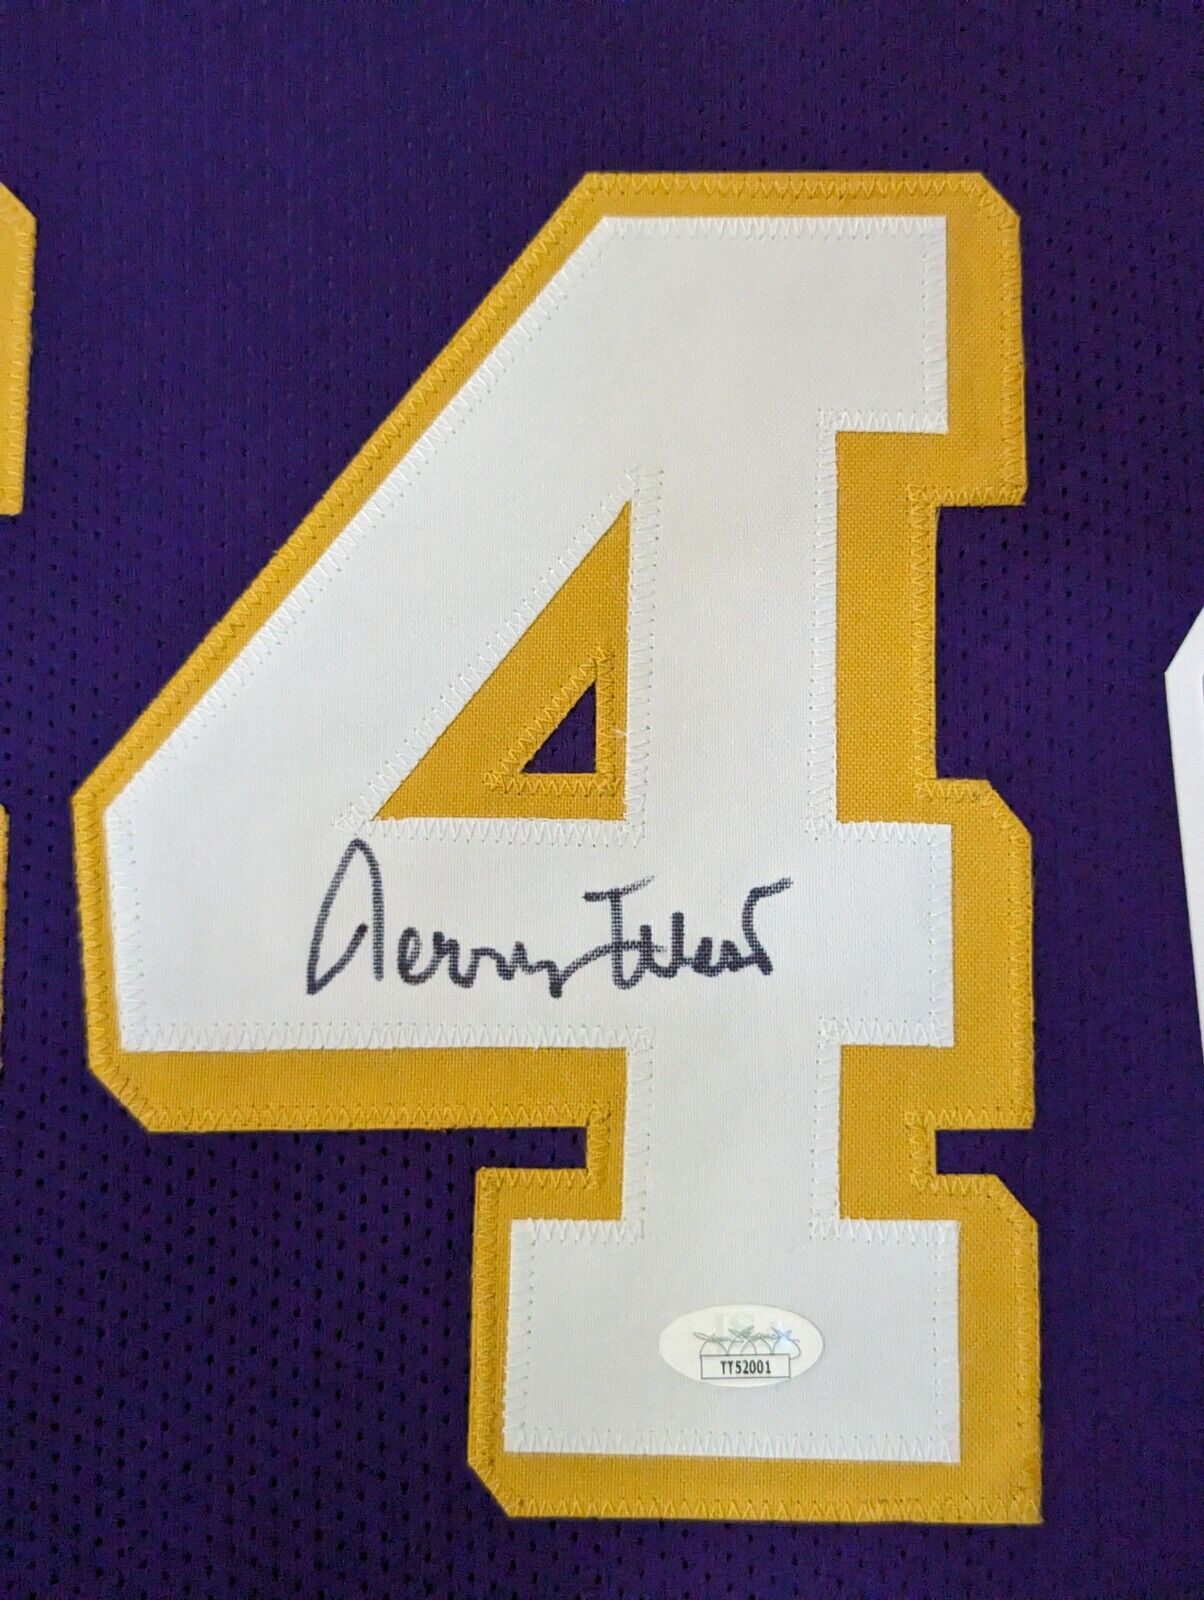 Framed L.A. Lakers Jerry West Autographed Signed Jersey Jsa Coa